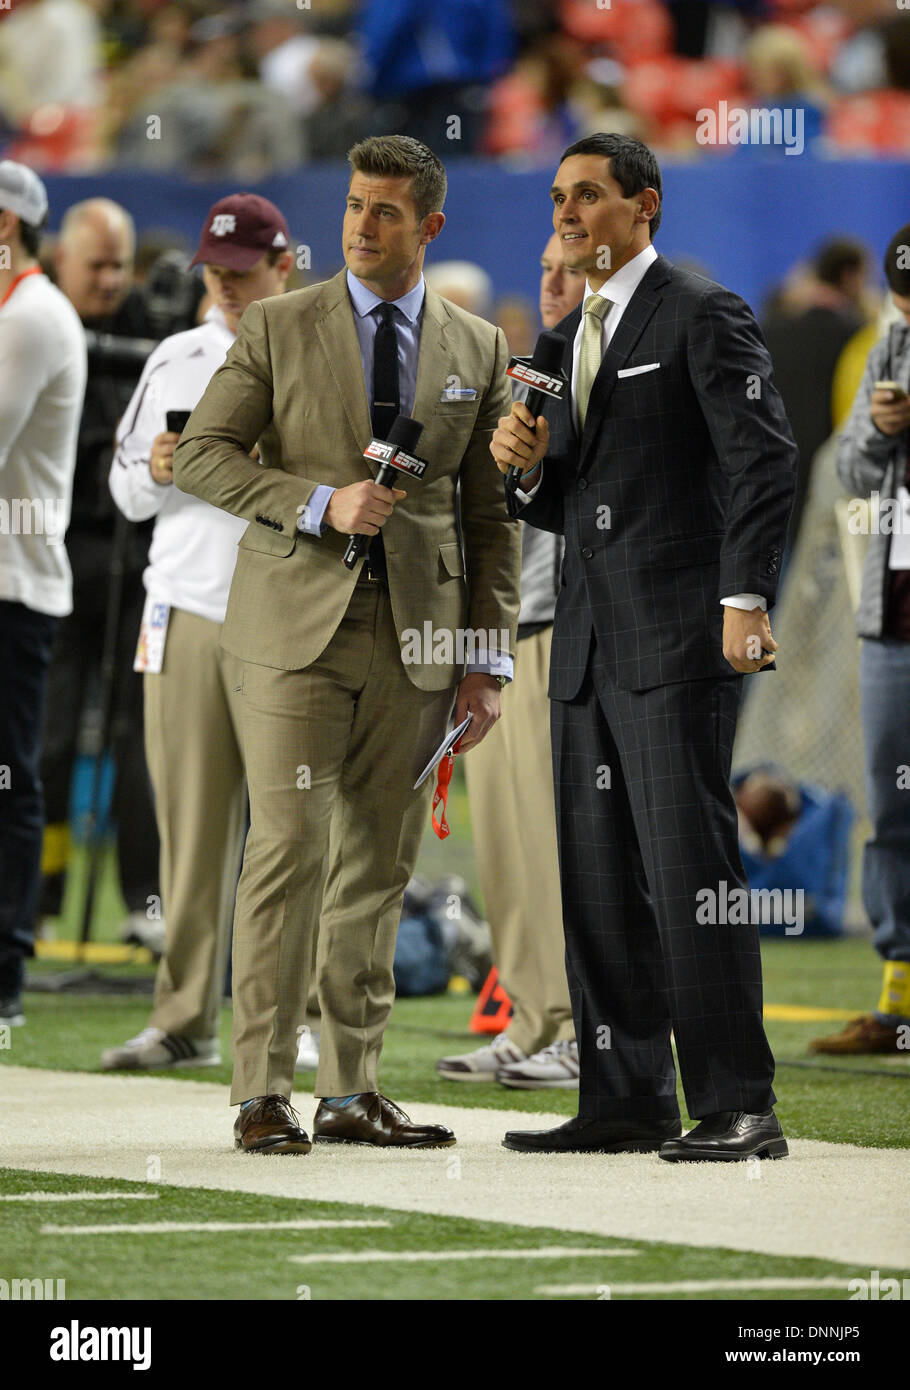 Atlanta, GA, USA. 31st Dec, 2013. December 31, 2013: ESPN cast David Pollack and Jesse Palmer during the Chick-Fil-A Bowl NCAA football game between the Duke Blue Devils and the Texas A&M Aggies at Georgia Dome in Atlanta, Georgia. Duke leads the first half against Texas A&M, 38-17. © csm/Alamy Live News Stock Photo